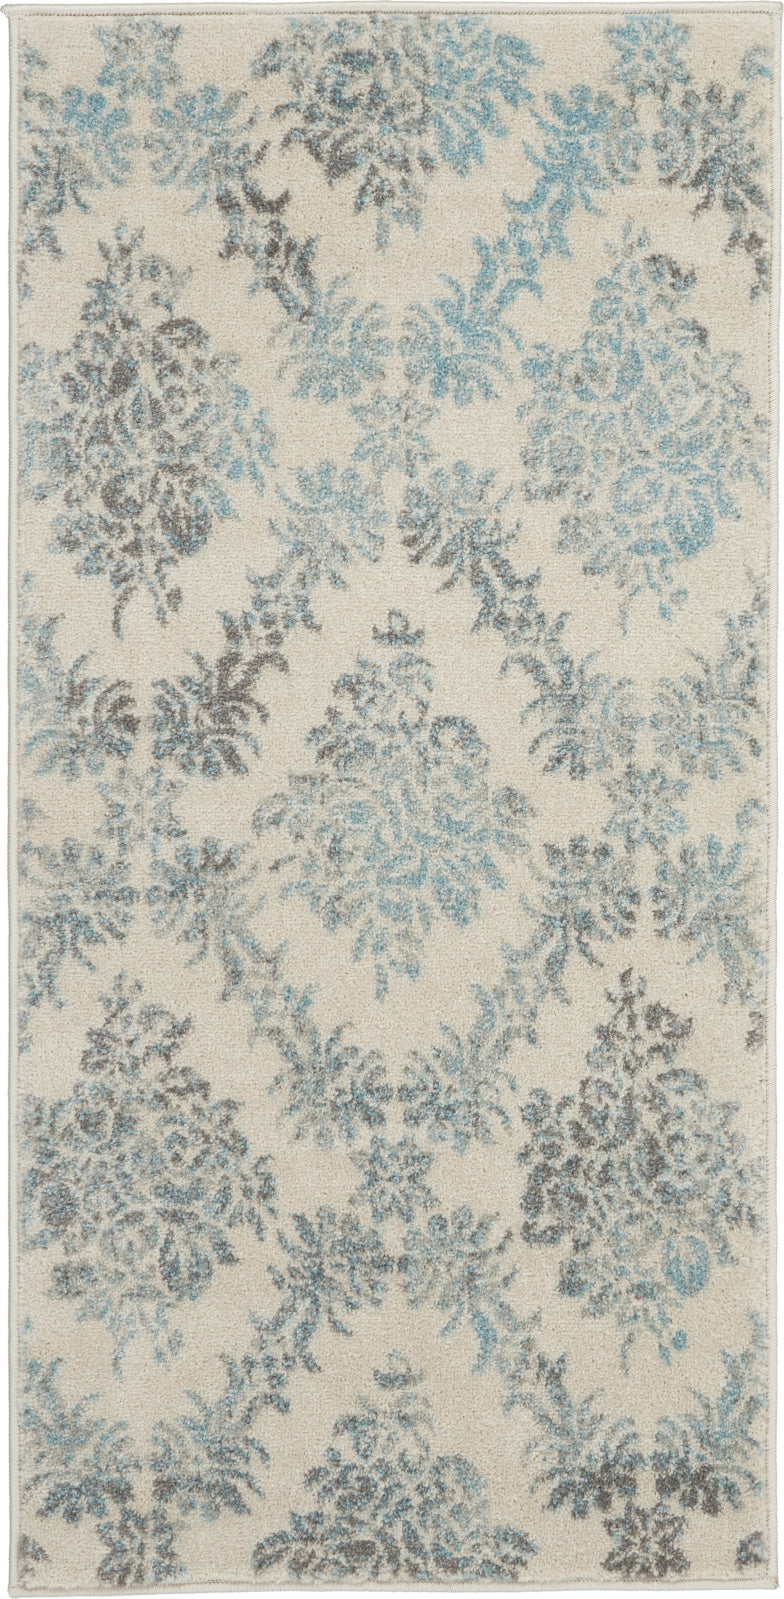 Tranquil TRA09 Ivory/Turquoise Area Rug by Nourison main image